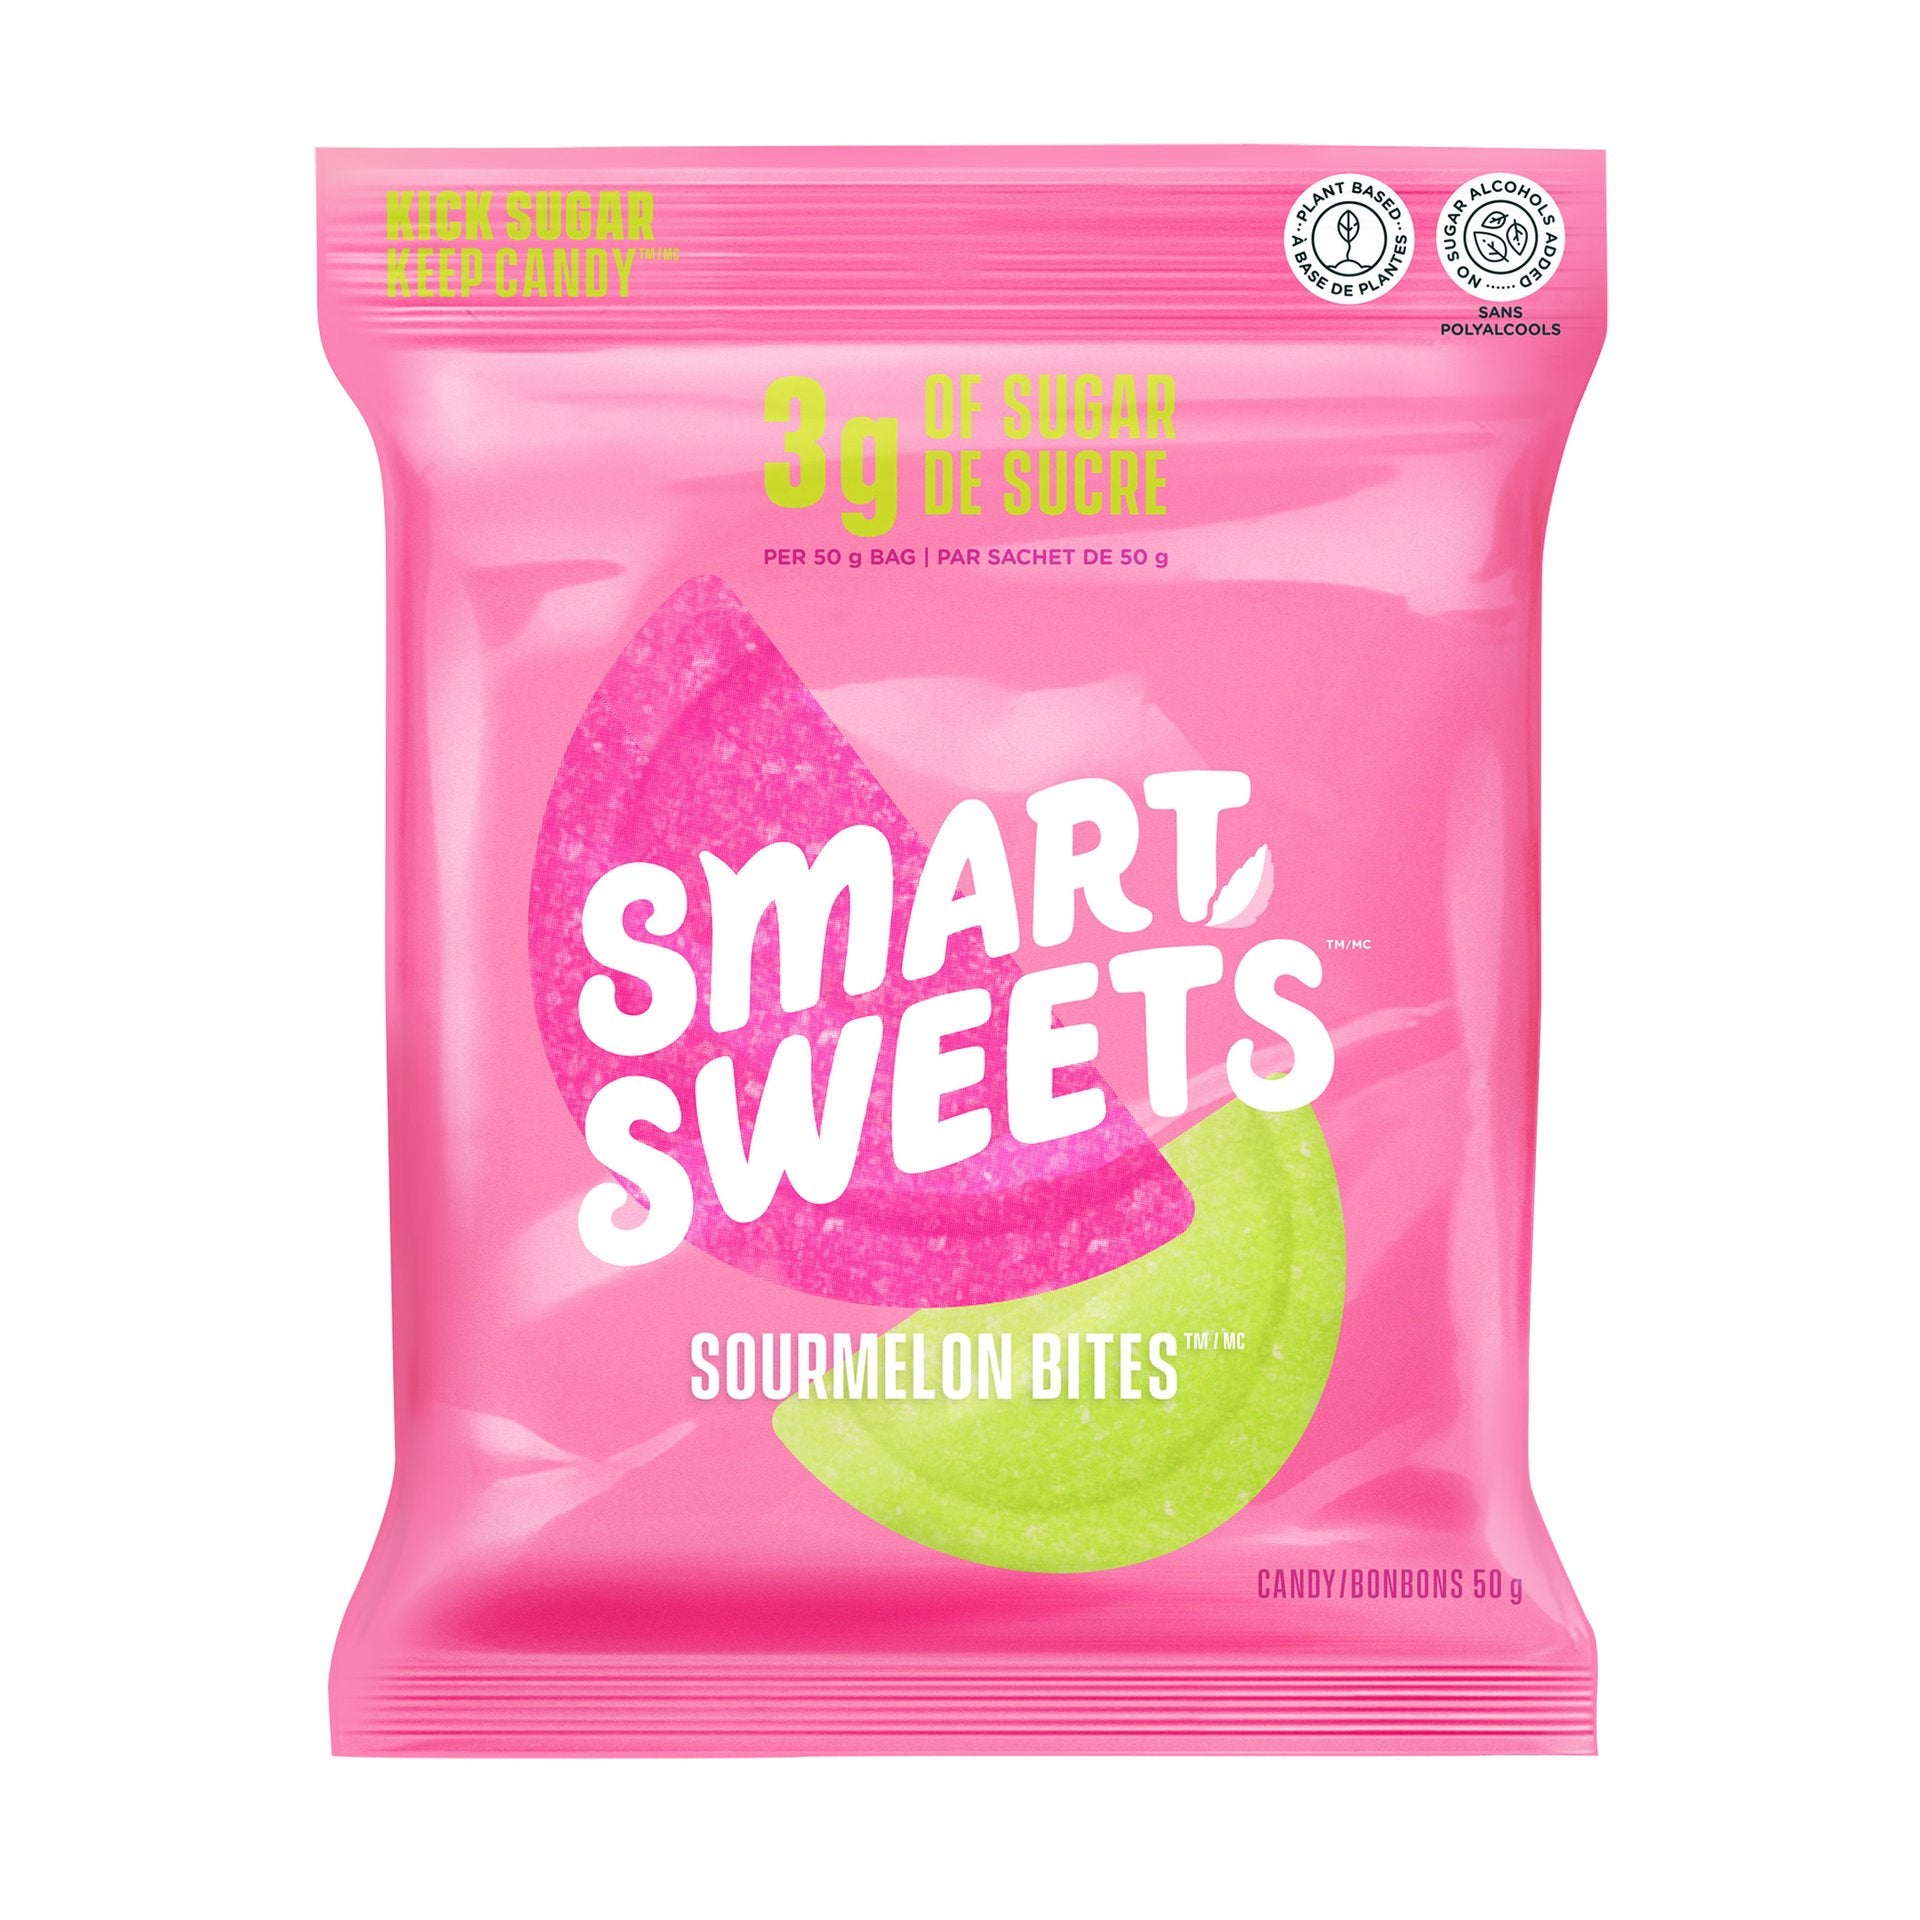 Smarts Sweets 3g